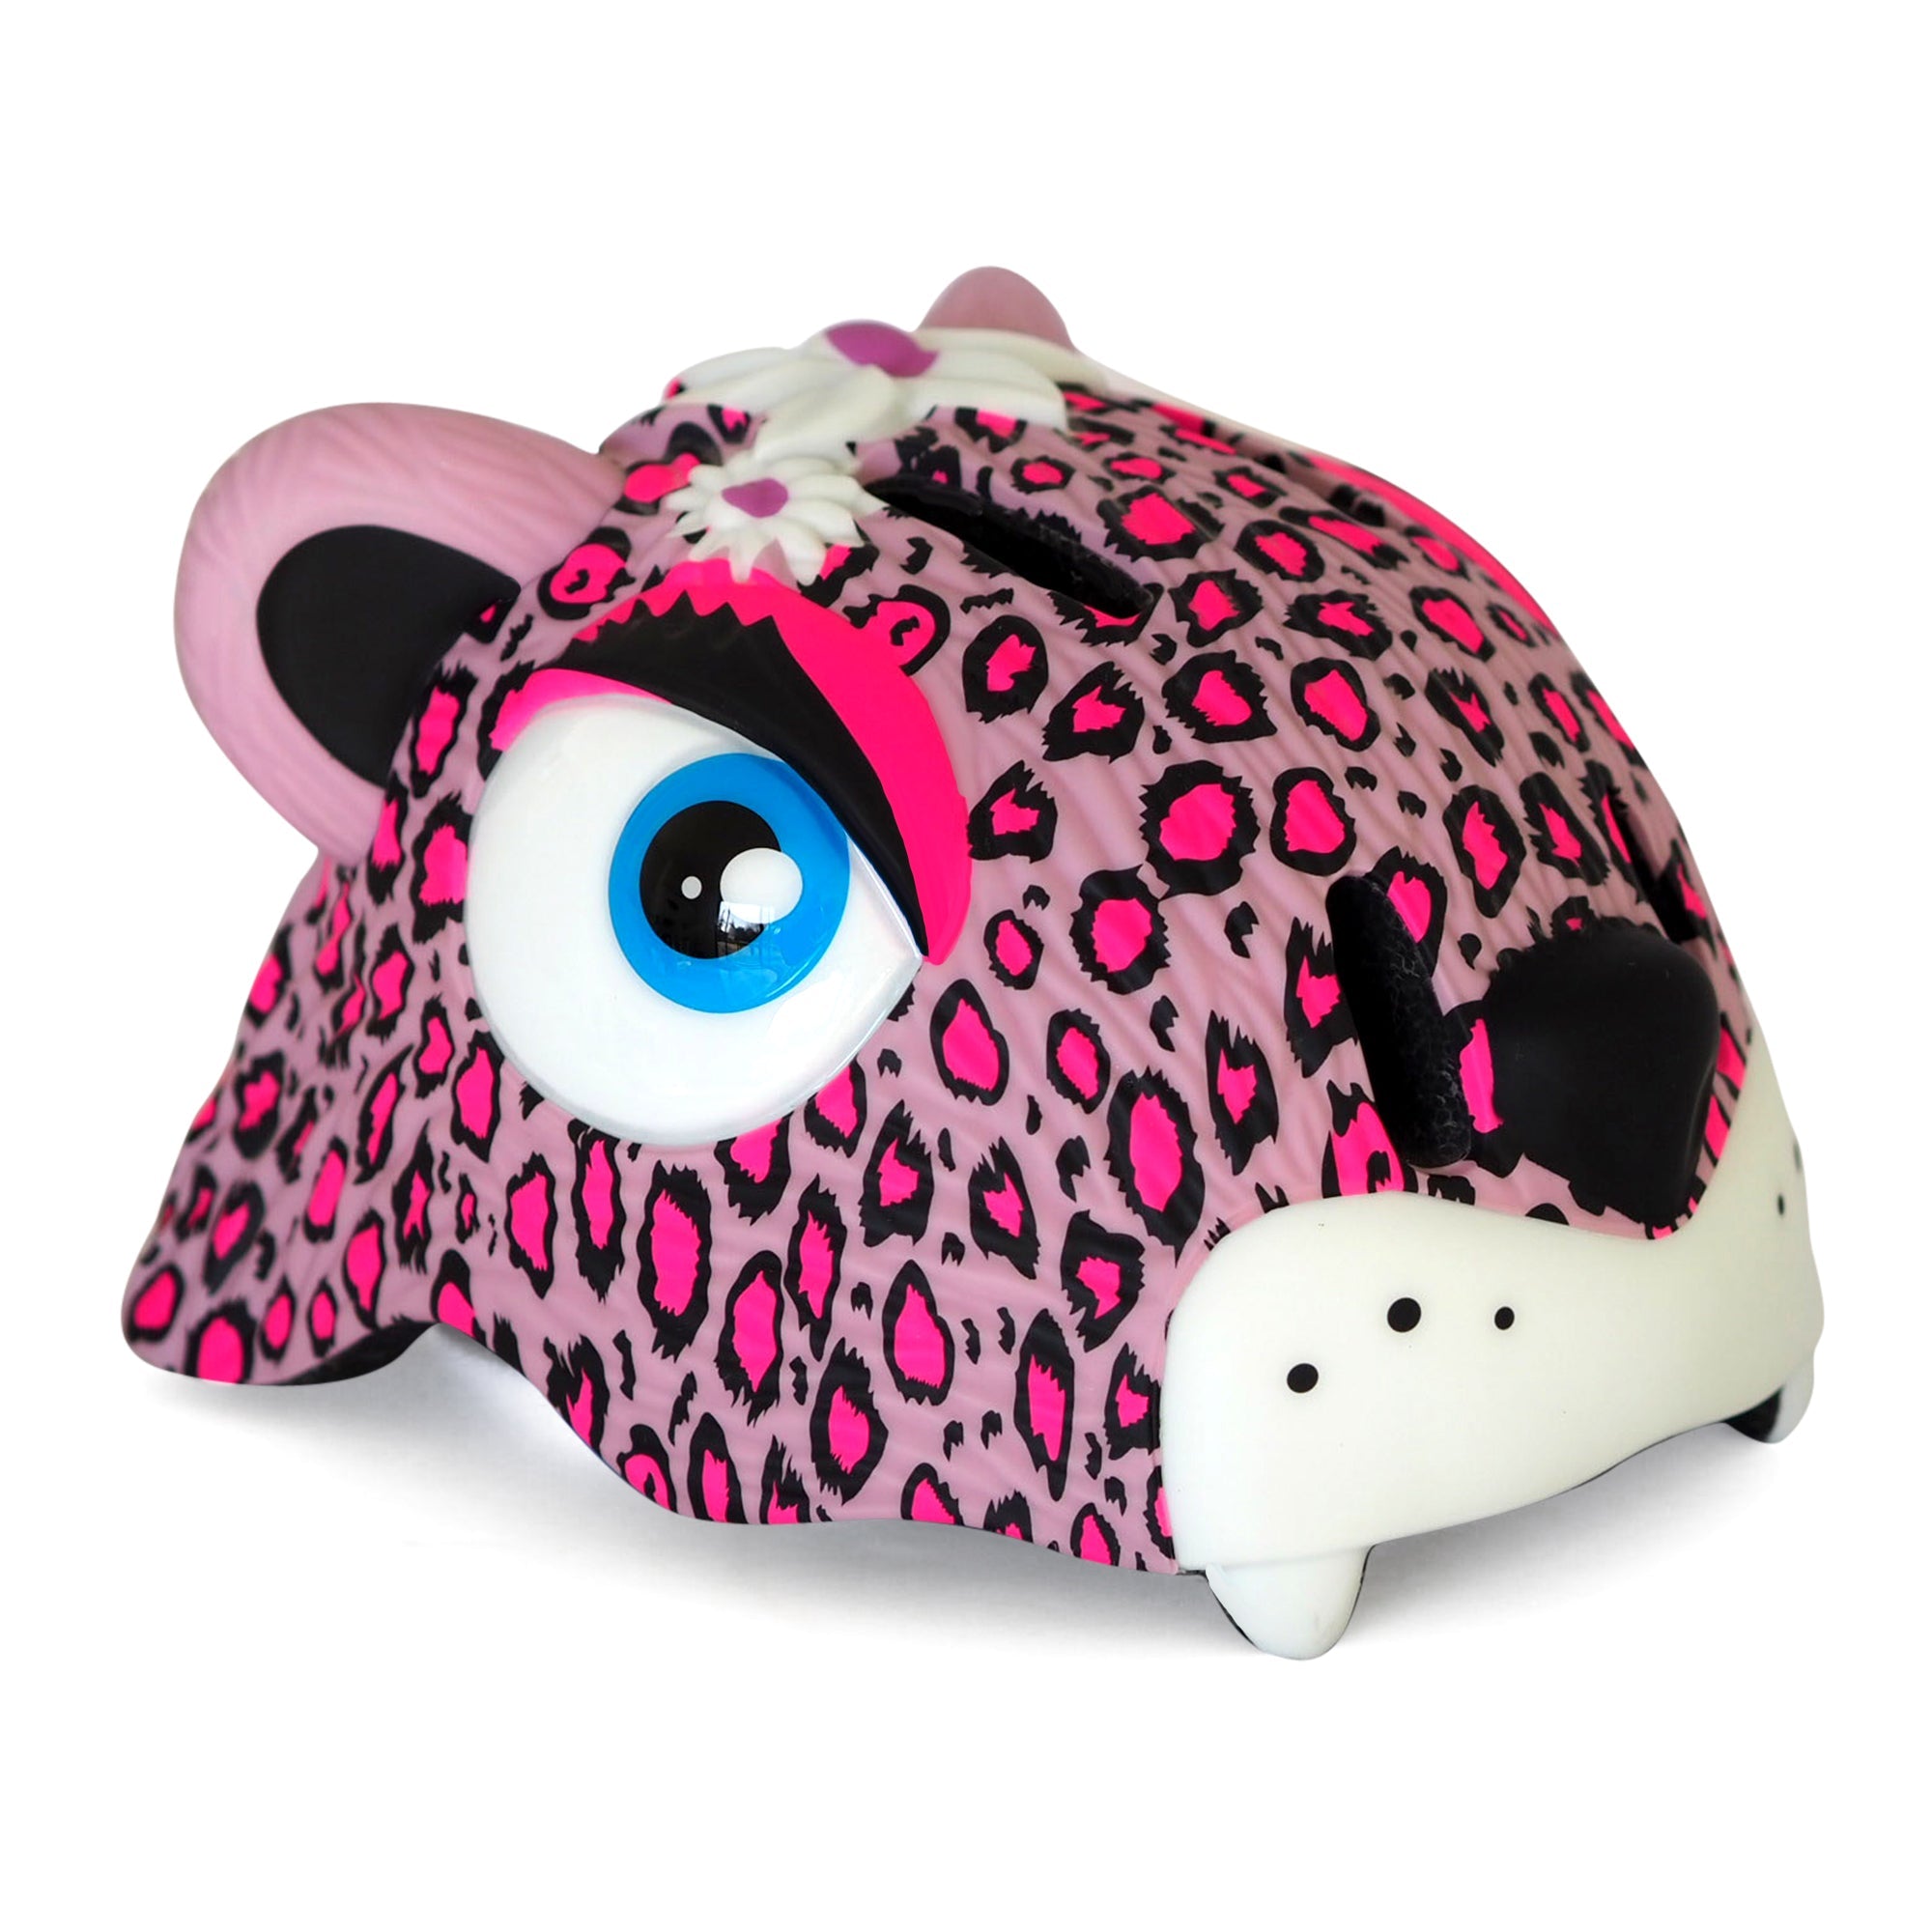 » Crazy Safety Leopard Bicycle Helmet (100% off)